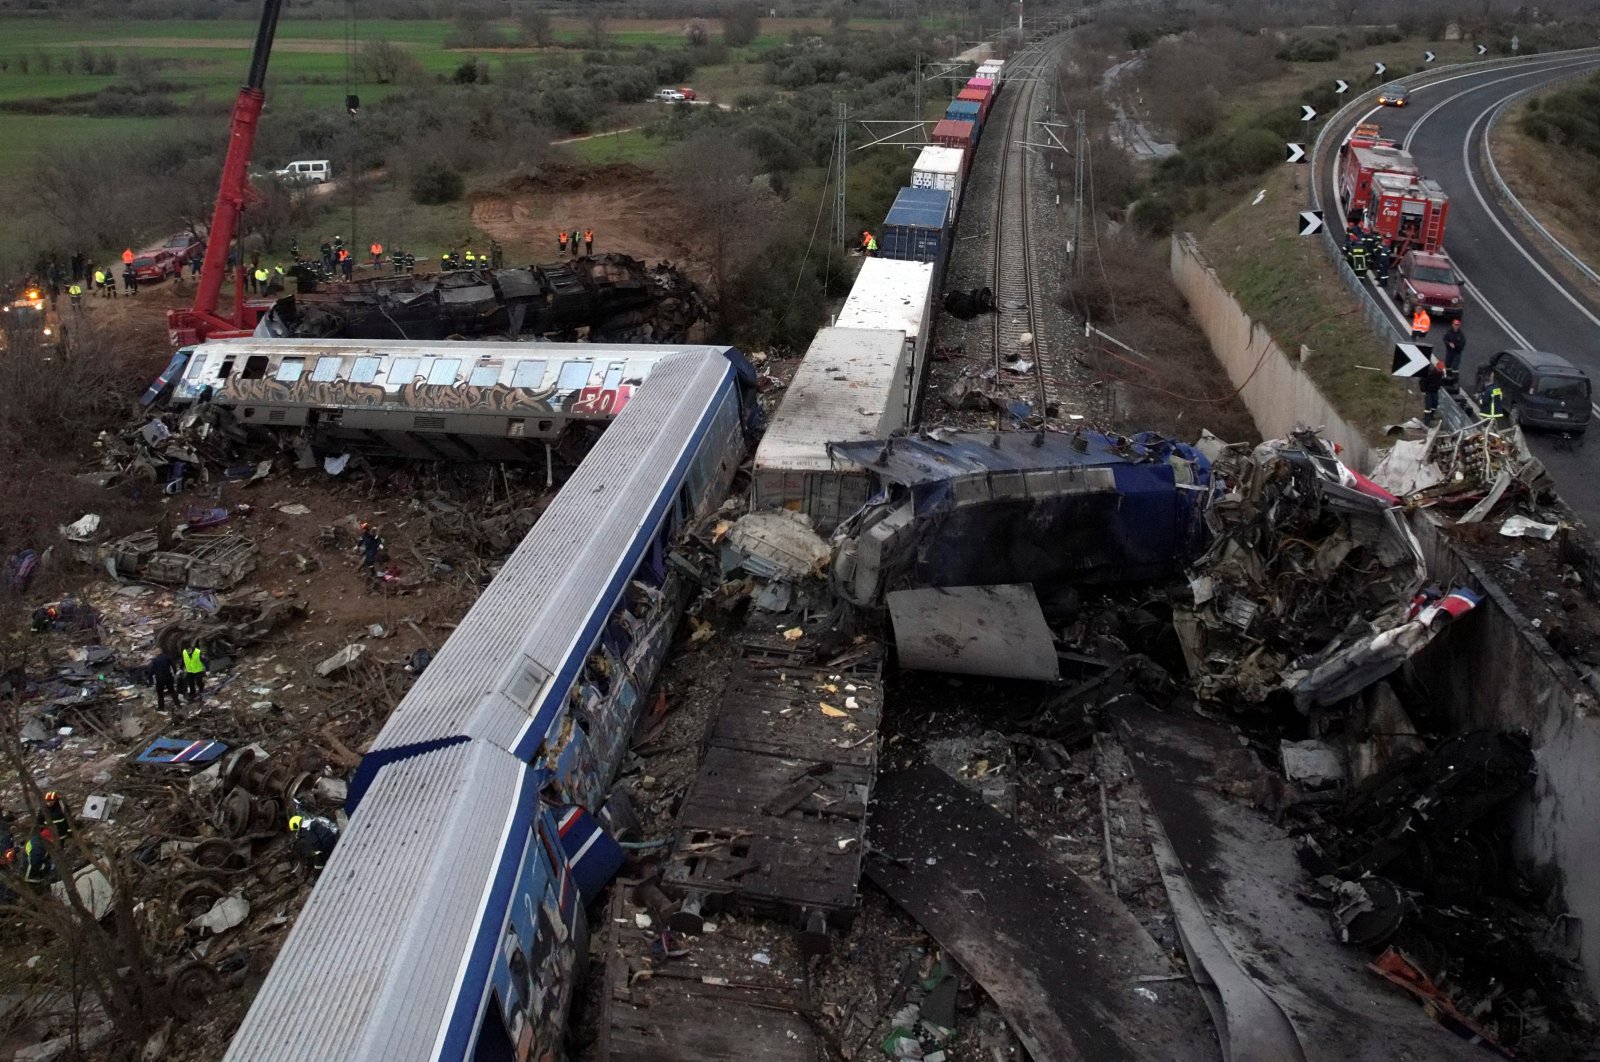 Rescue crews operate at the site of a crash, where two trains collided, near the city of Larissa, Greece, March 1, 2023. (Reuters Photo)